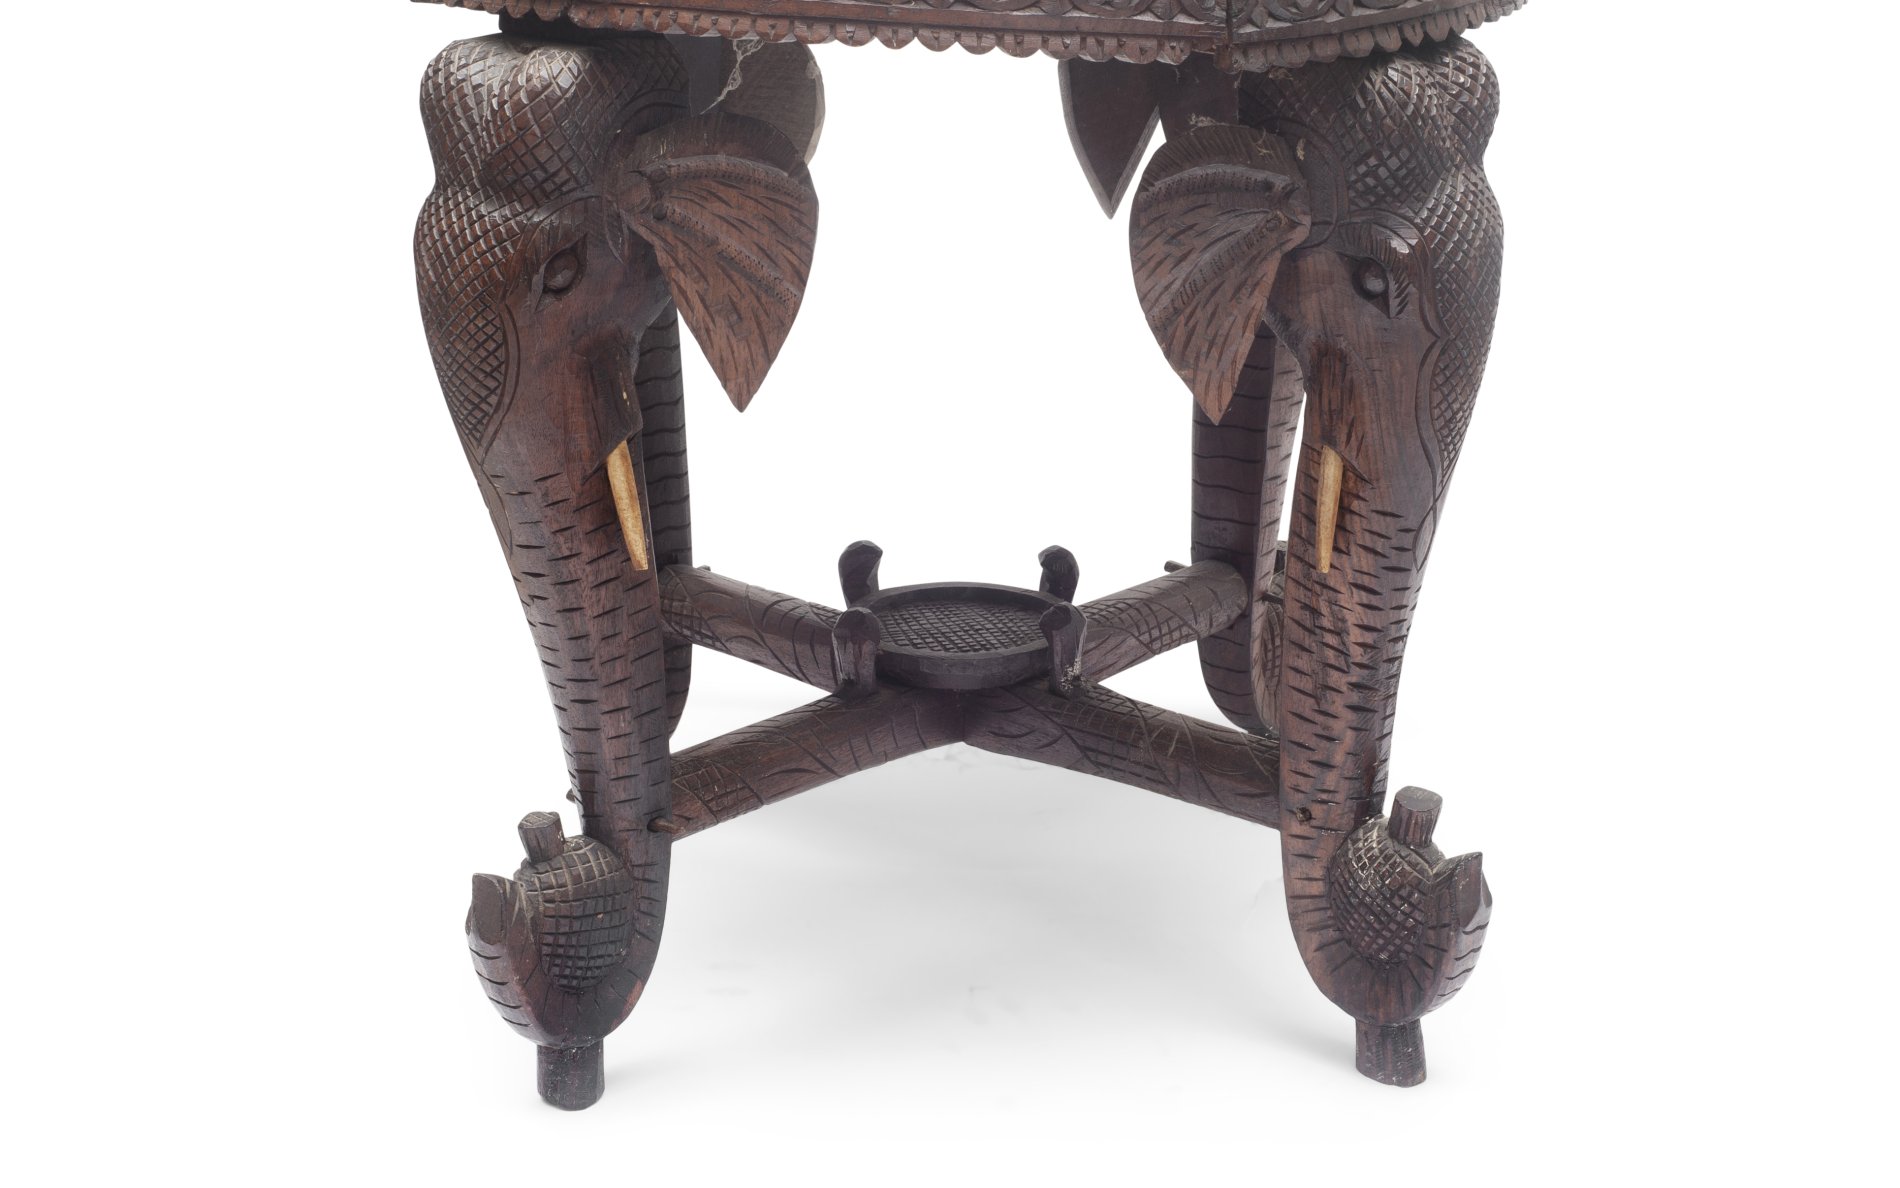 AN EARLY 20TH CENTURY INDIAN CARVED WOOD TABLE OF ELEPHANT THEME - Image 3 of 4